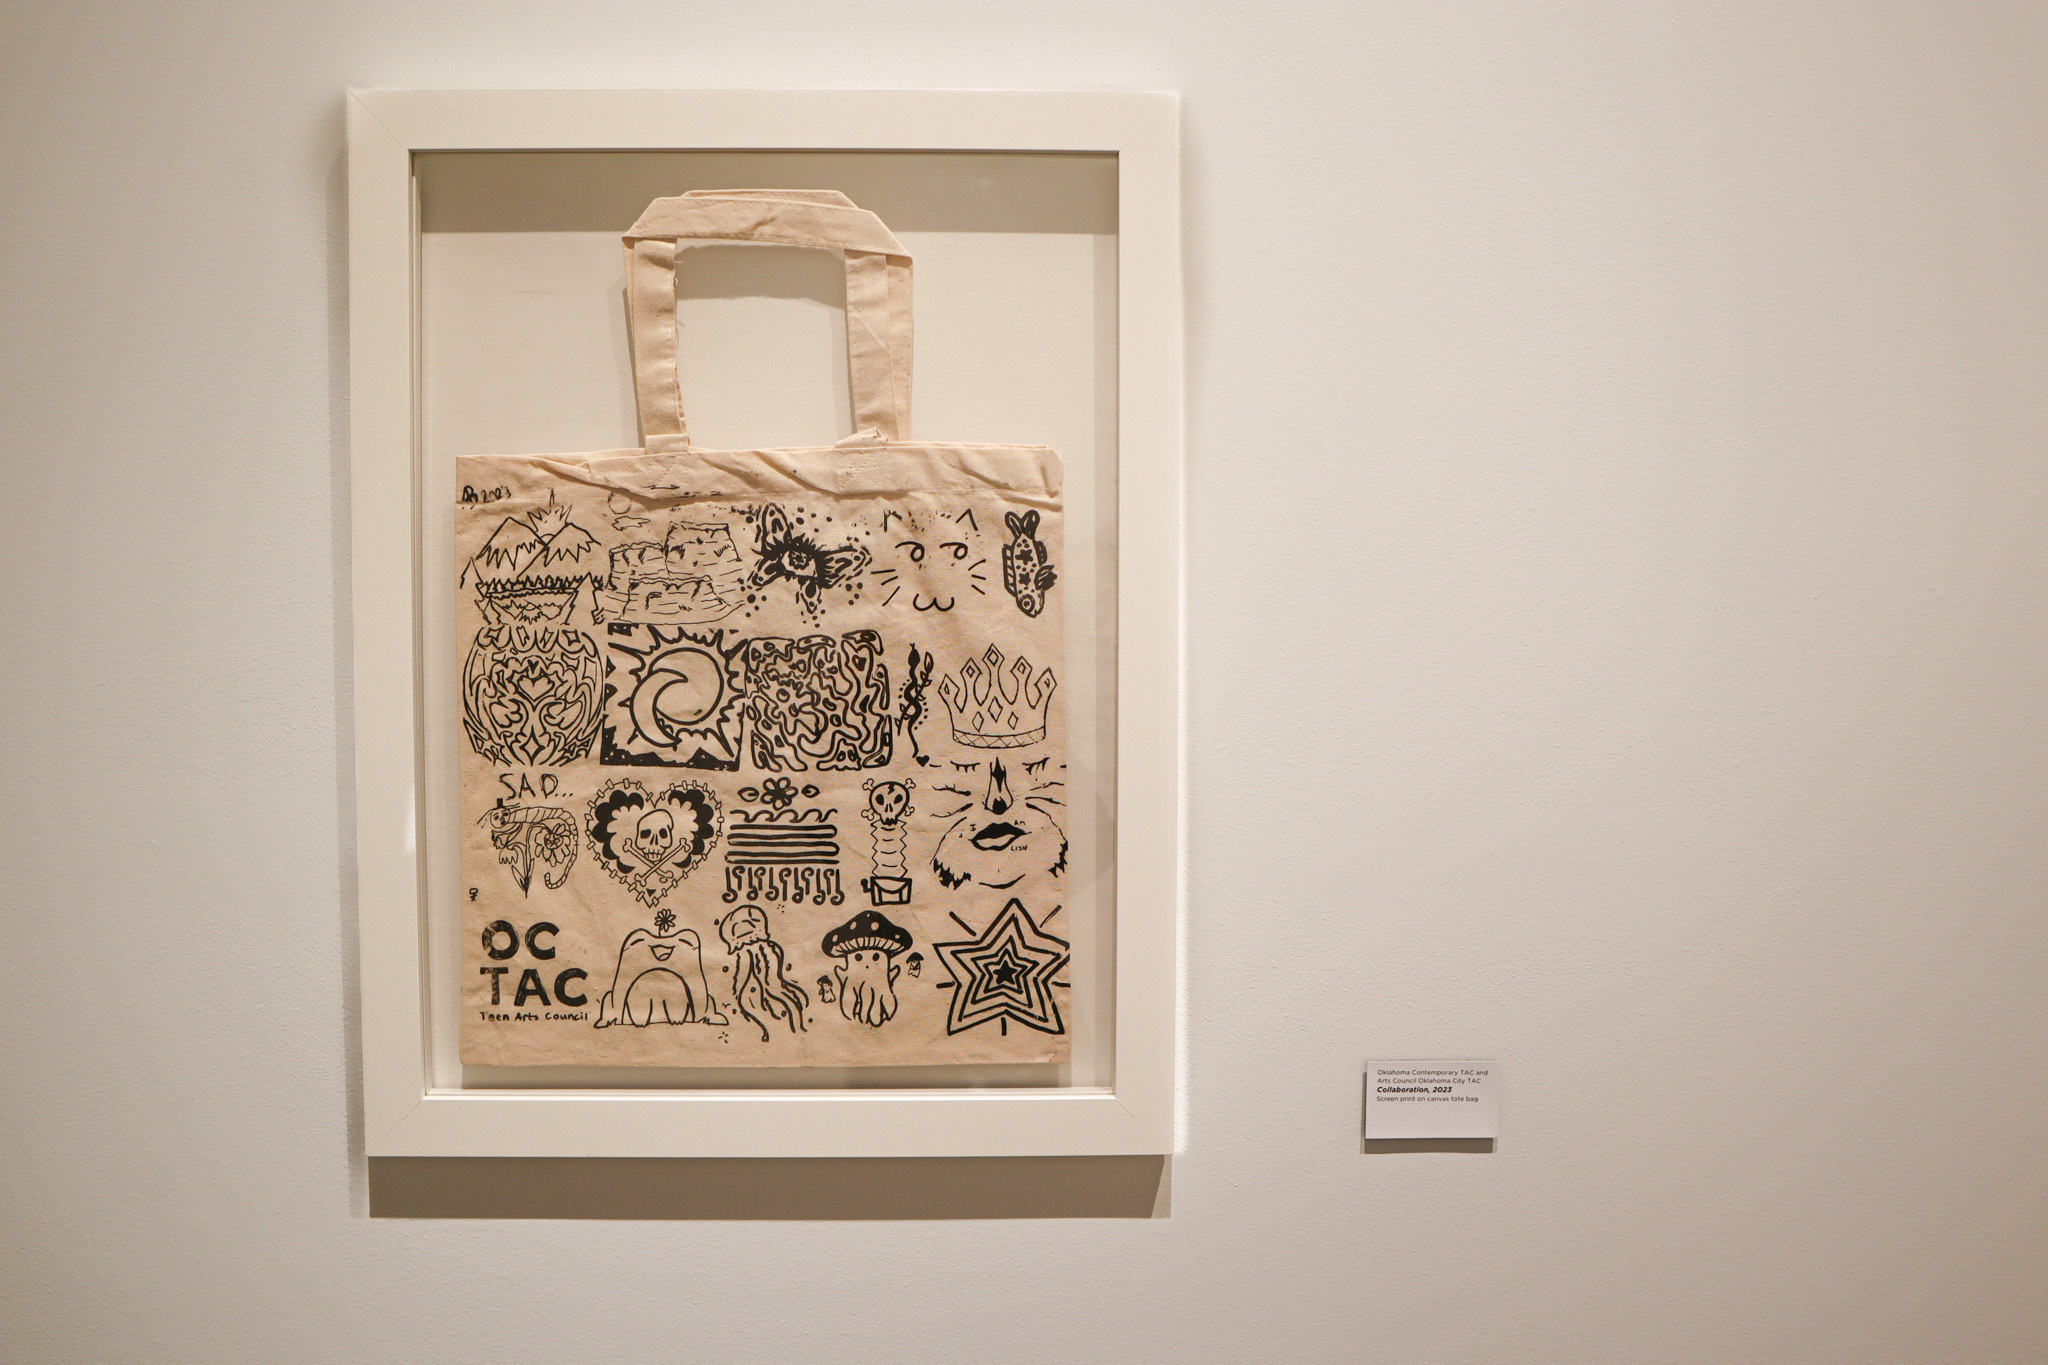 A canvas tote hangs framed on a gallery wall. The tote is decorated in black drawings and doodles.